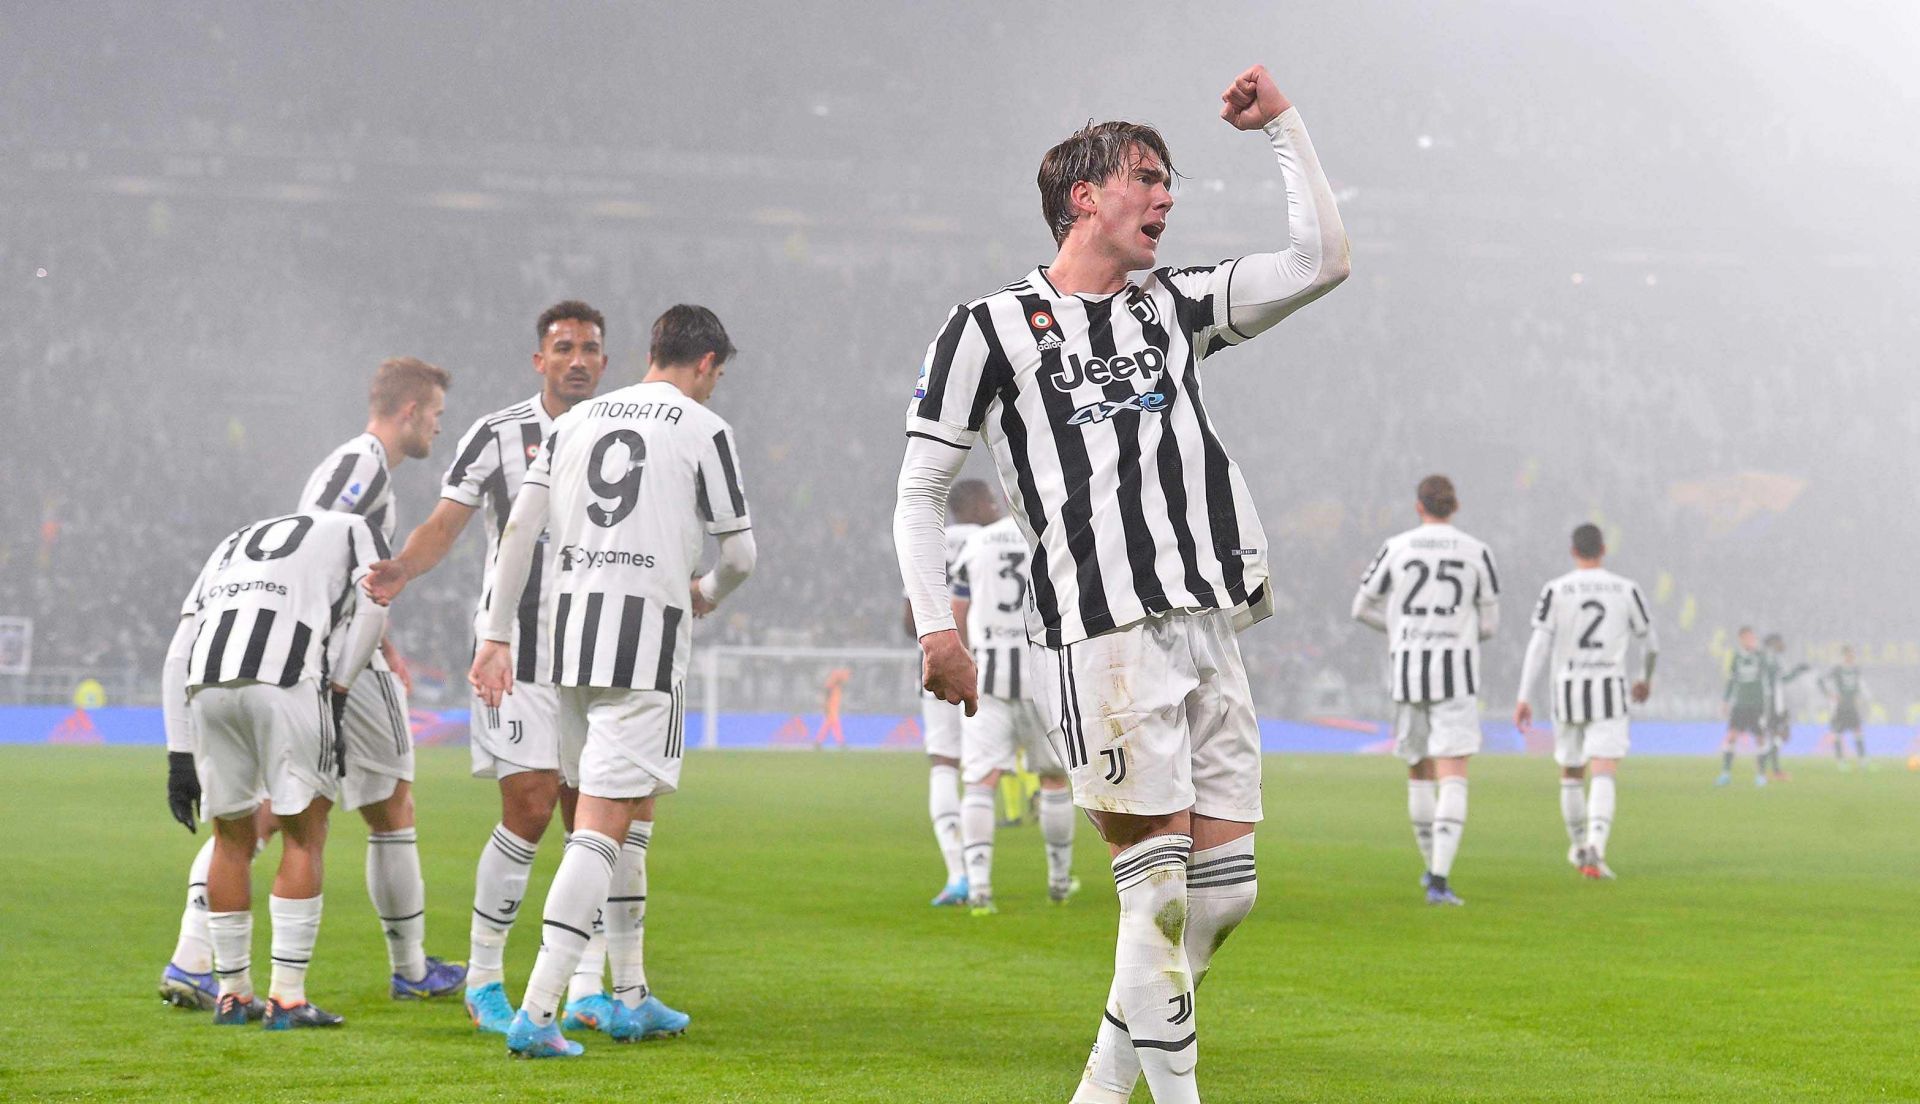 Dusan Vlahovic scored on his Serie A debut for the Bianconeri against Hellas Verona.